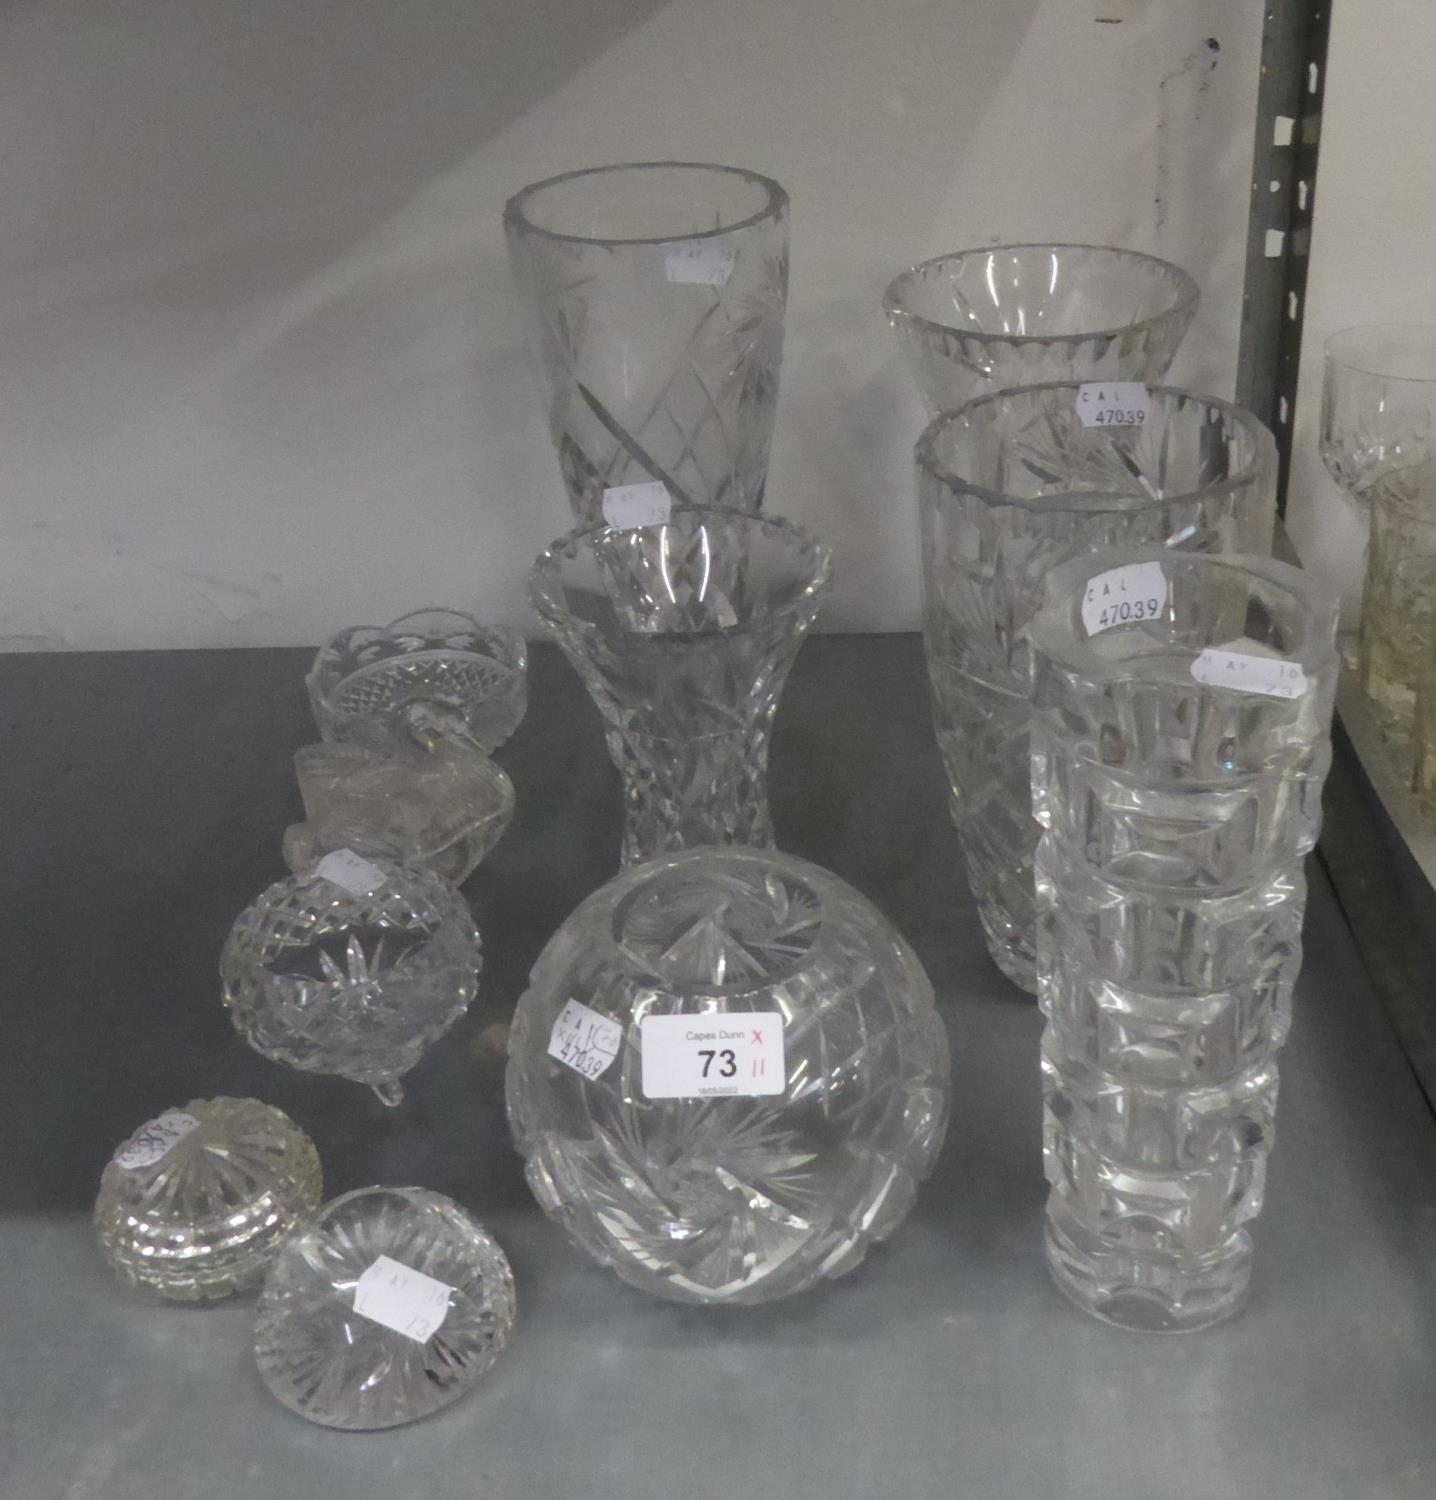 THREE GOOD SIZE CUT GLASS FLOWER VASES, WITH WHORL CUT DECORATION, AN ORBICULAR CUT GLASS VASE,